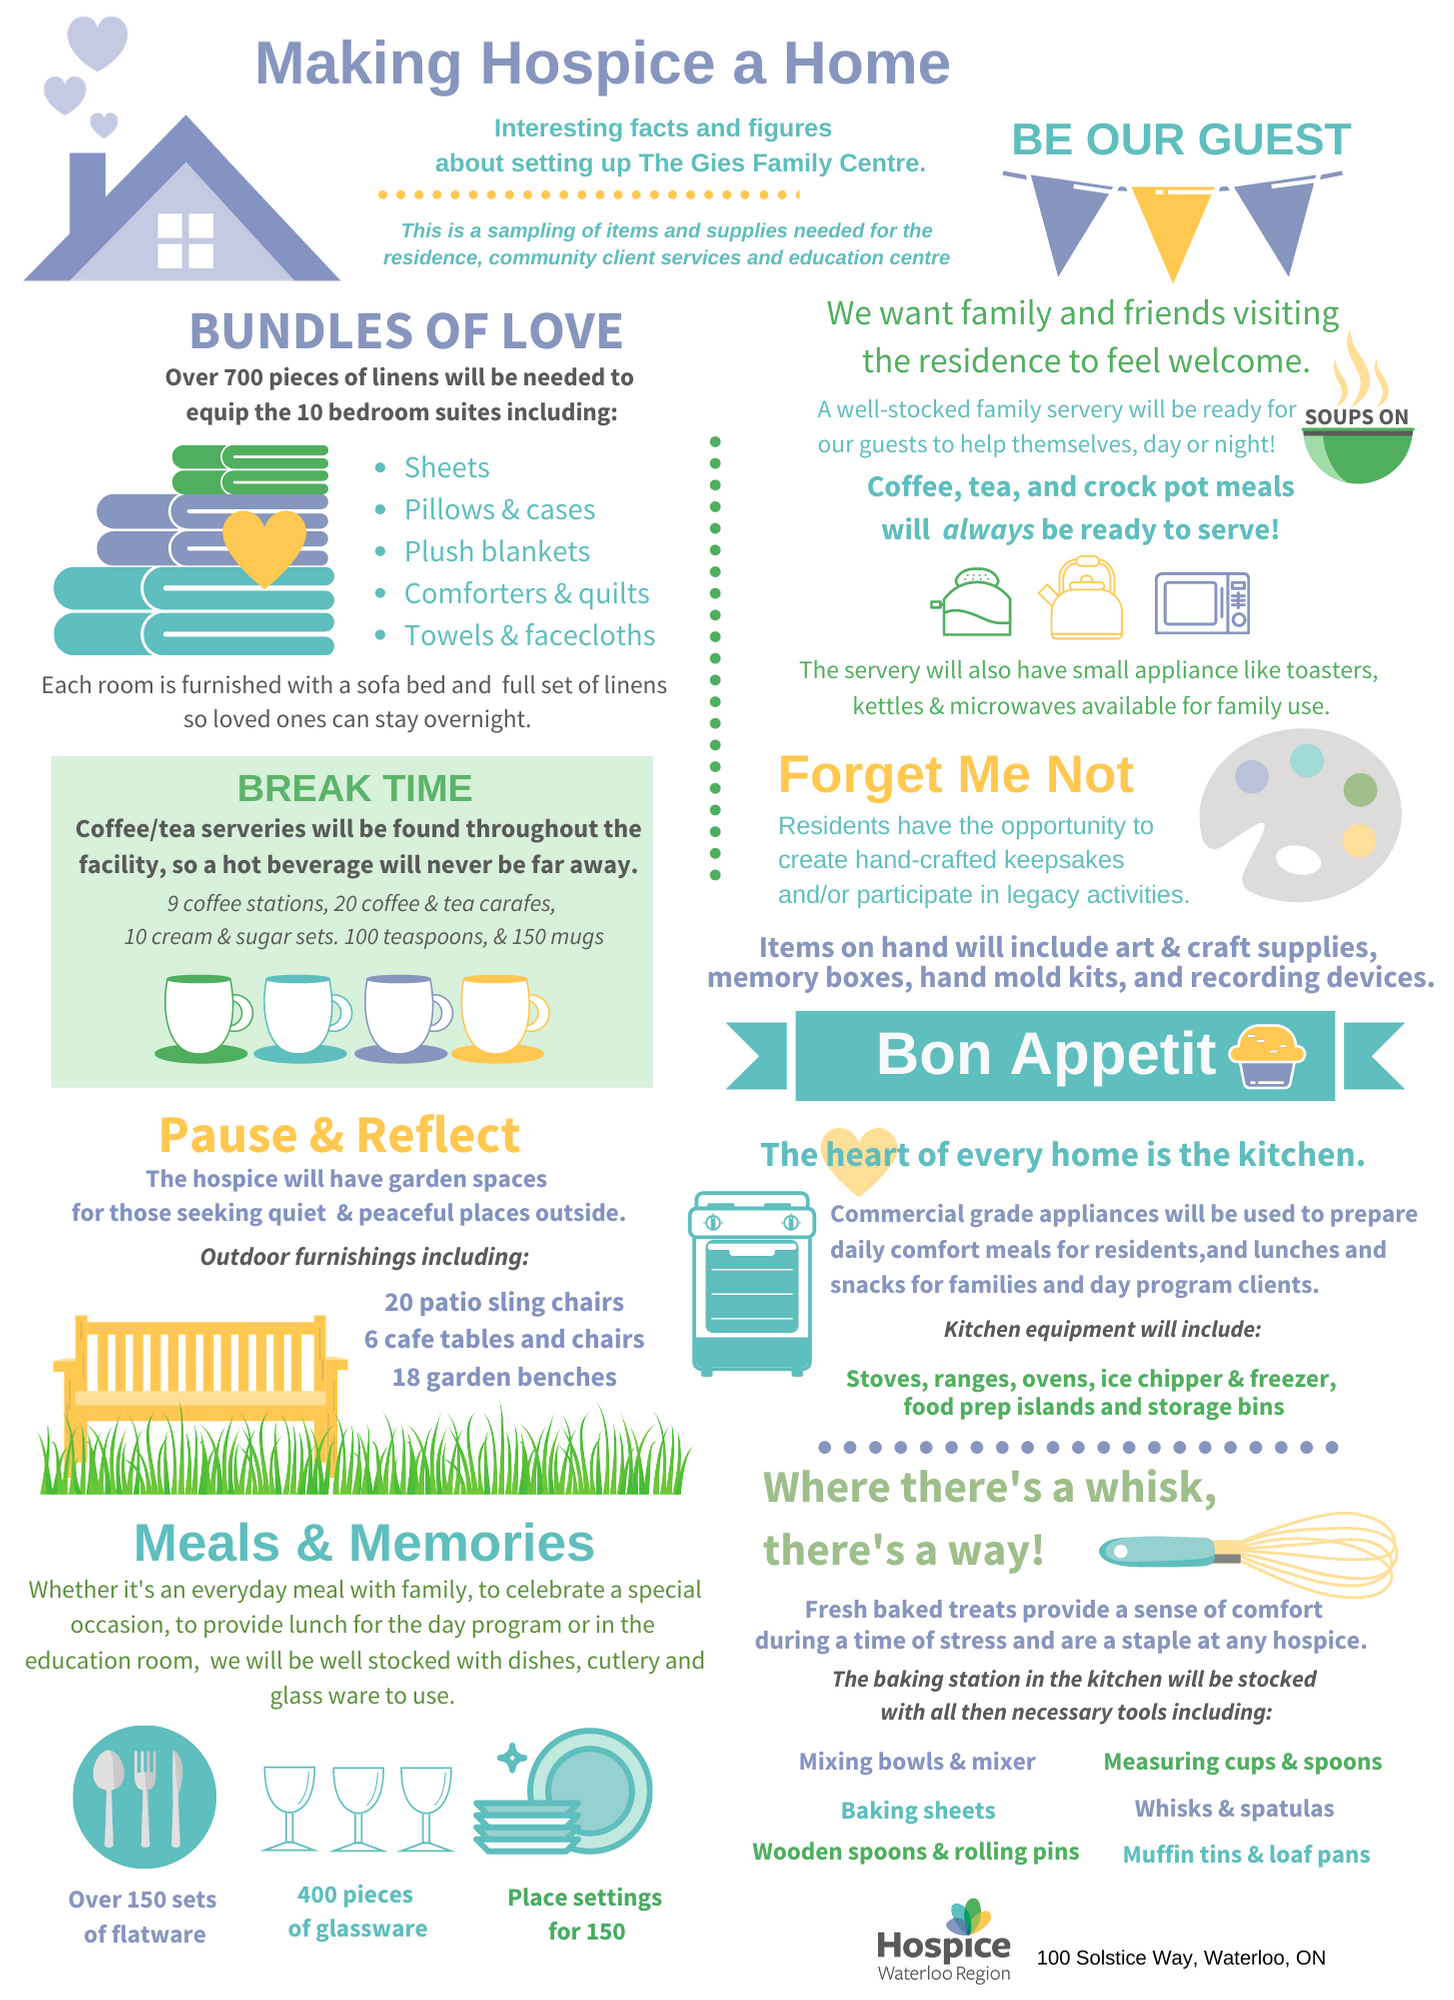 Making Hospice a Home Infographic